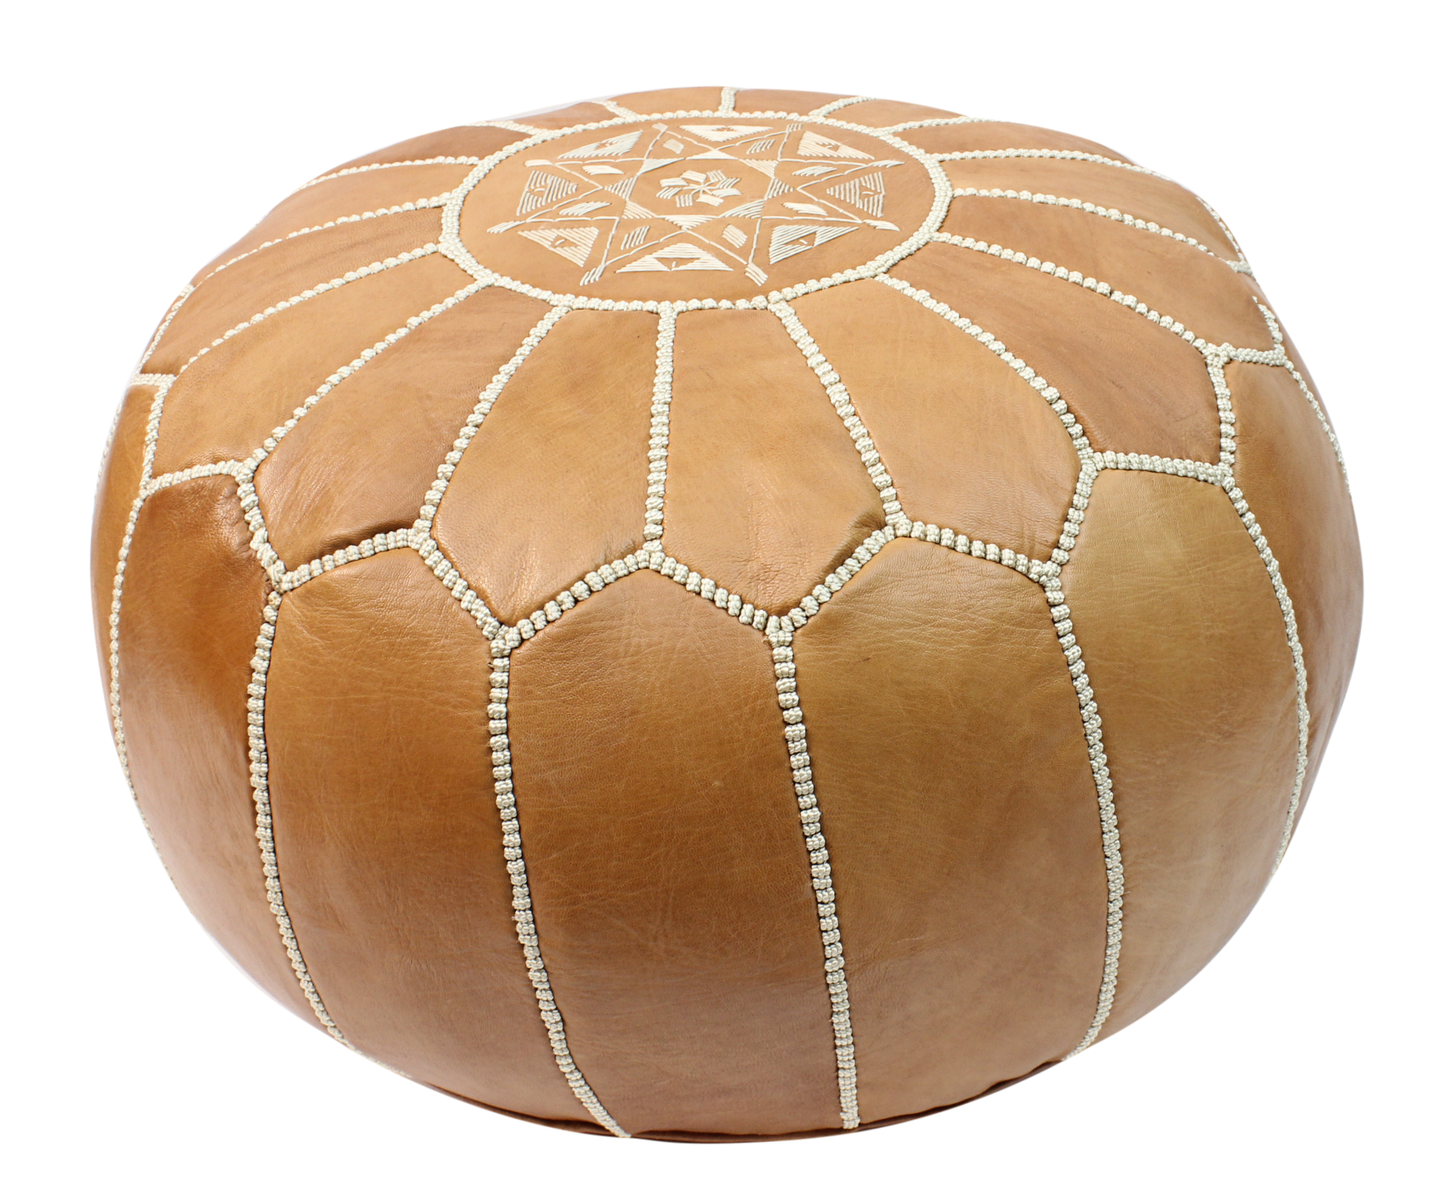 Moroccan Pouffe Pouf Ottoman Footstool RAK2 COVER ONLY or STUFFED Genuine Natural Tan Leather